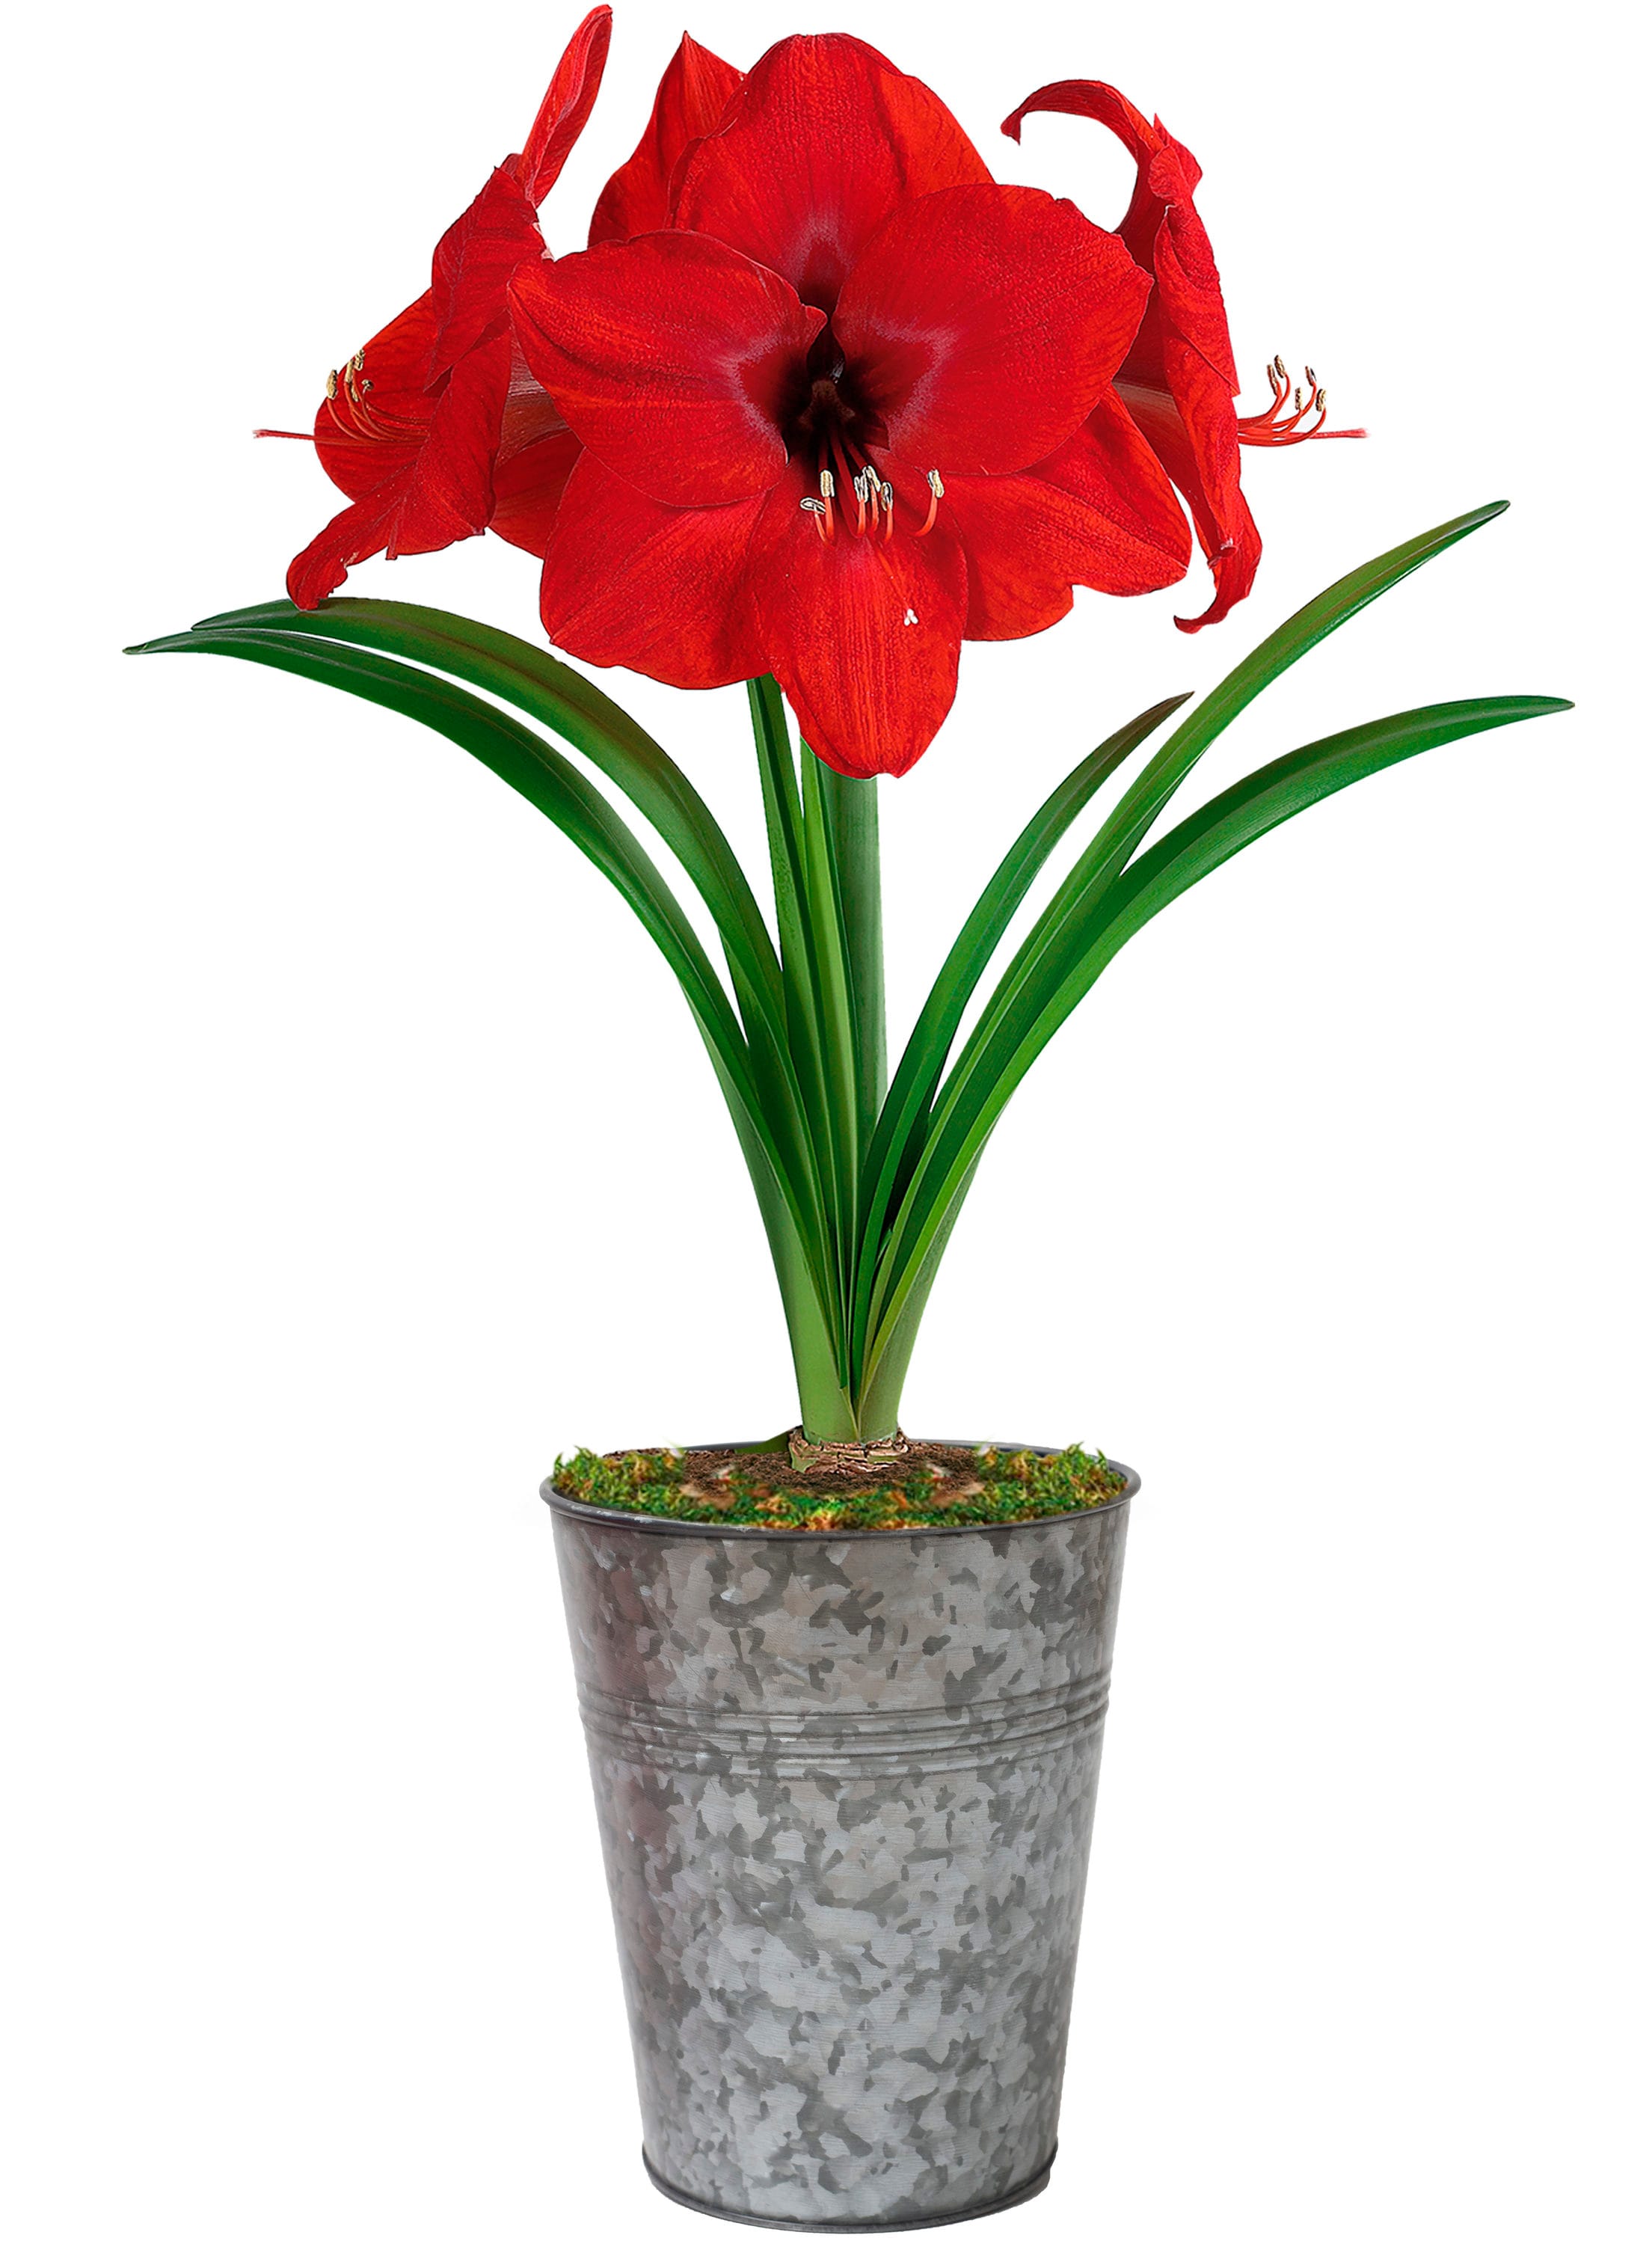 Garden State Bulb Red Lion Amaryllis Bulbs Planter Plant Bulbs department at Lowes.com